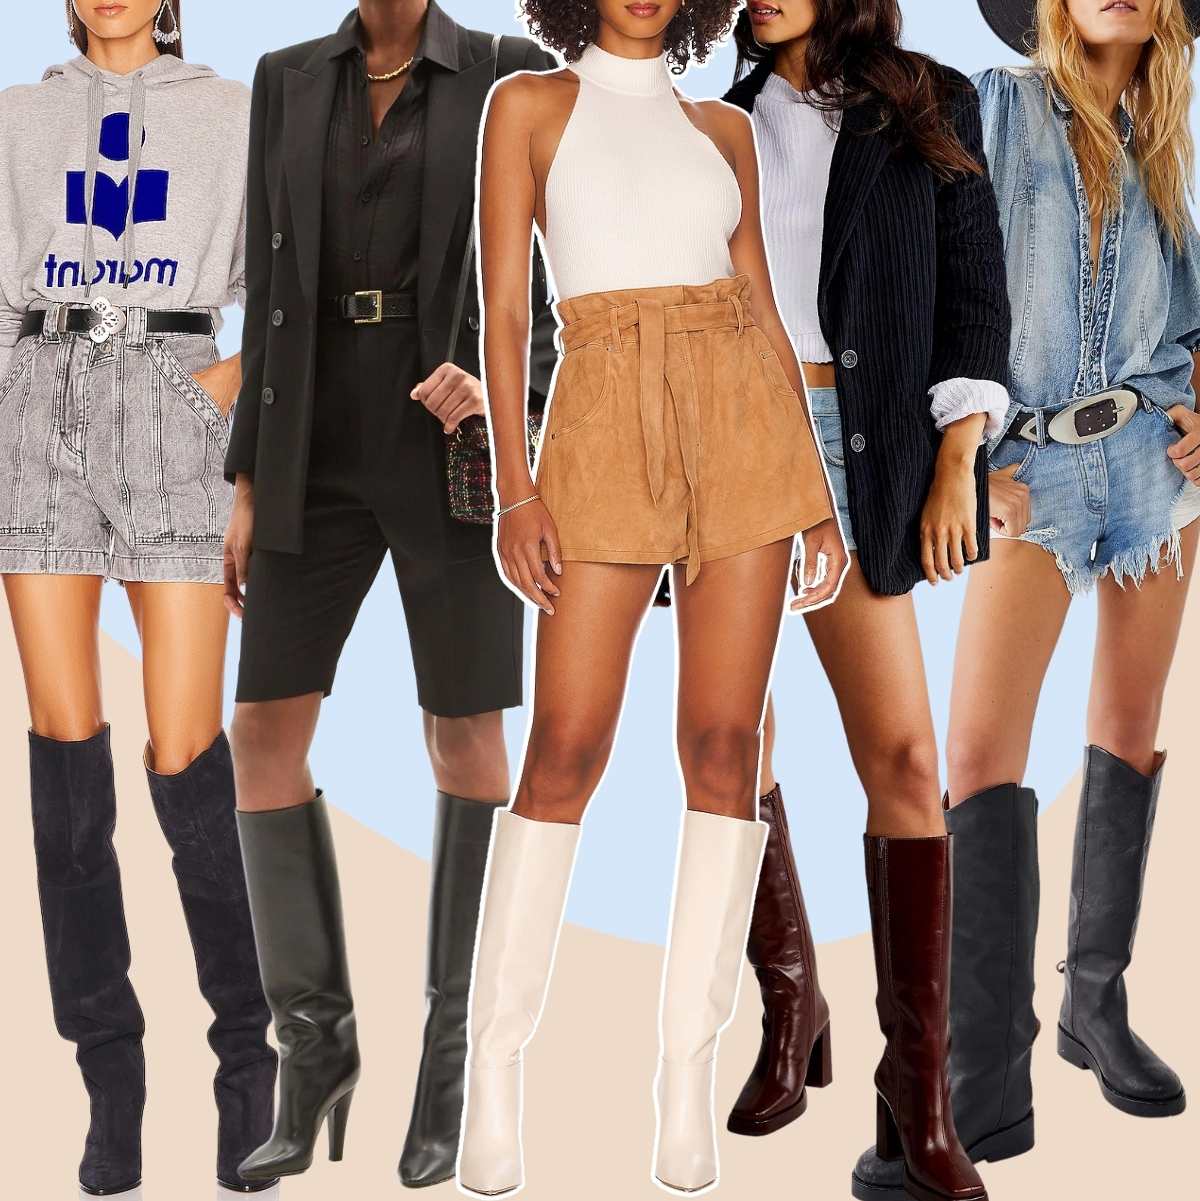 Knee Boots With Shorts | vlr.eng.br